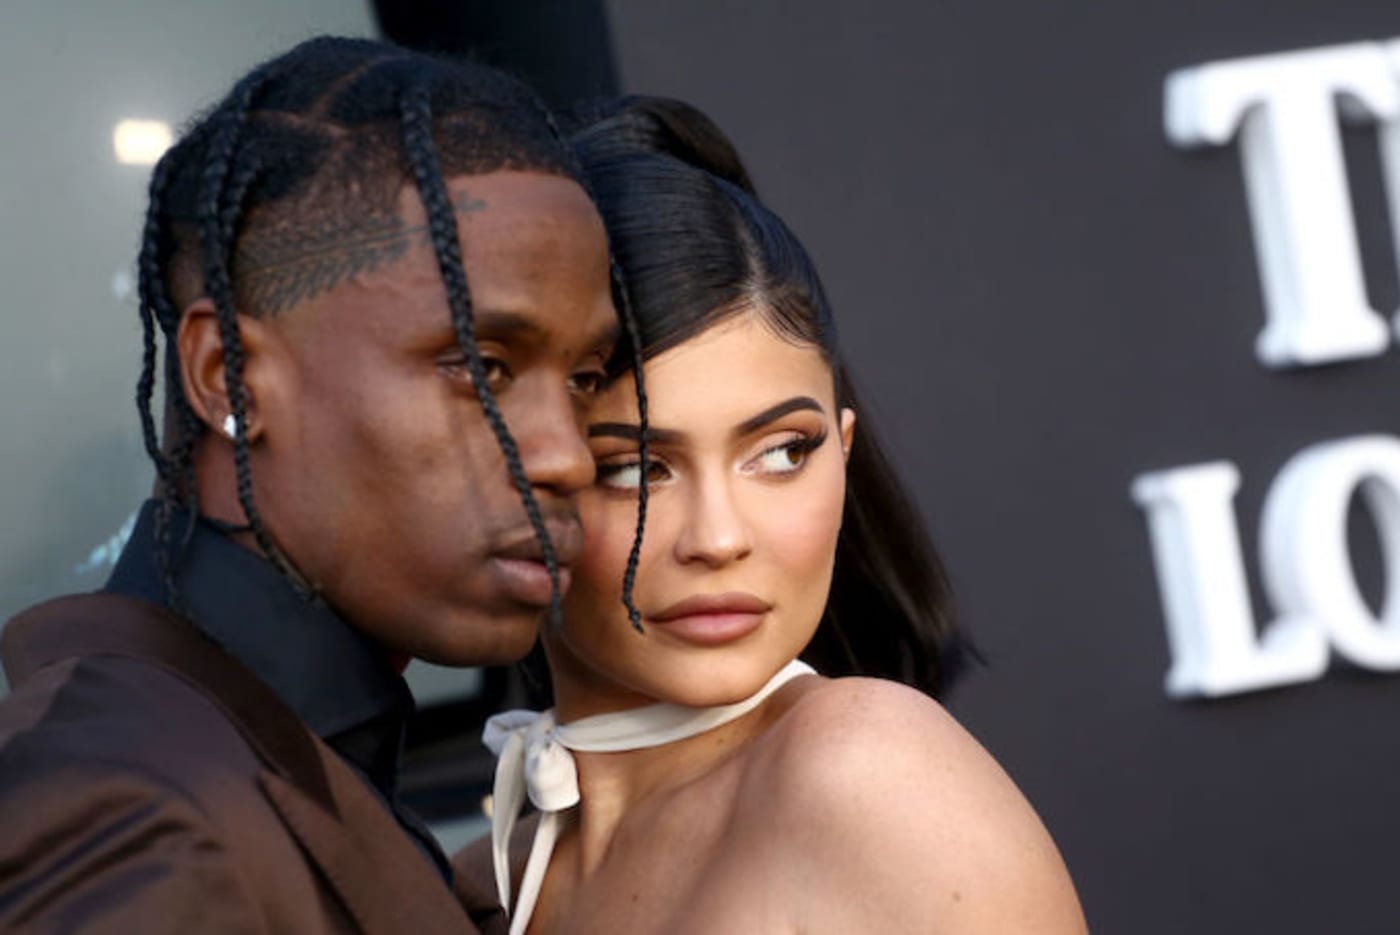 This is a picture of Kylie and Travis.